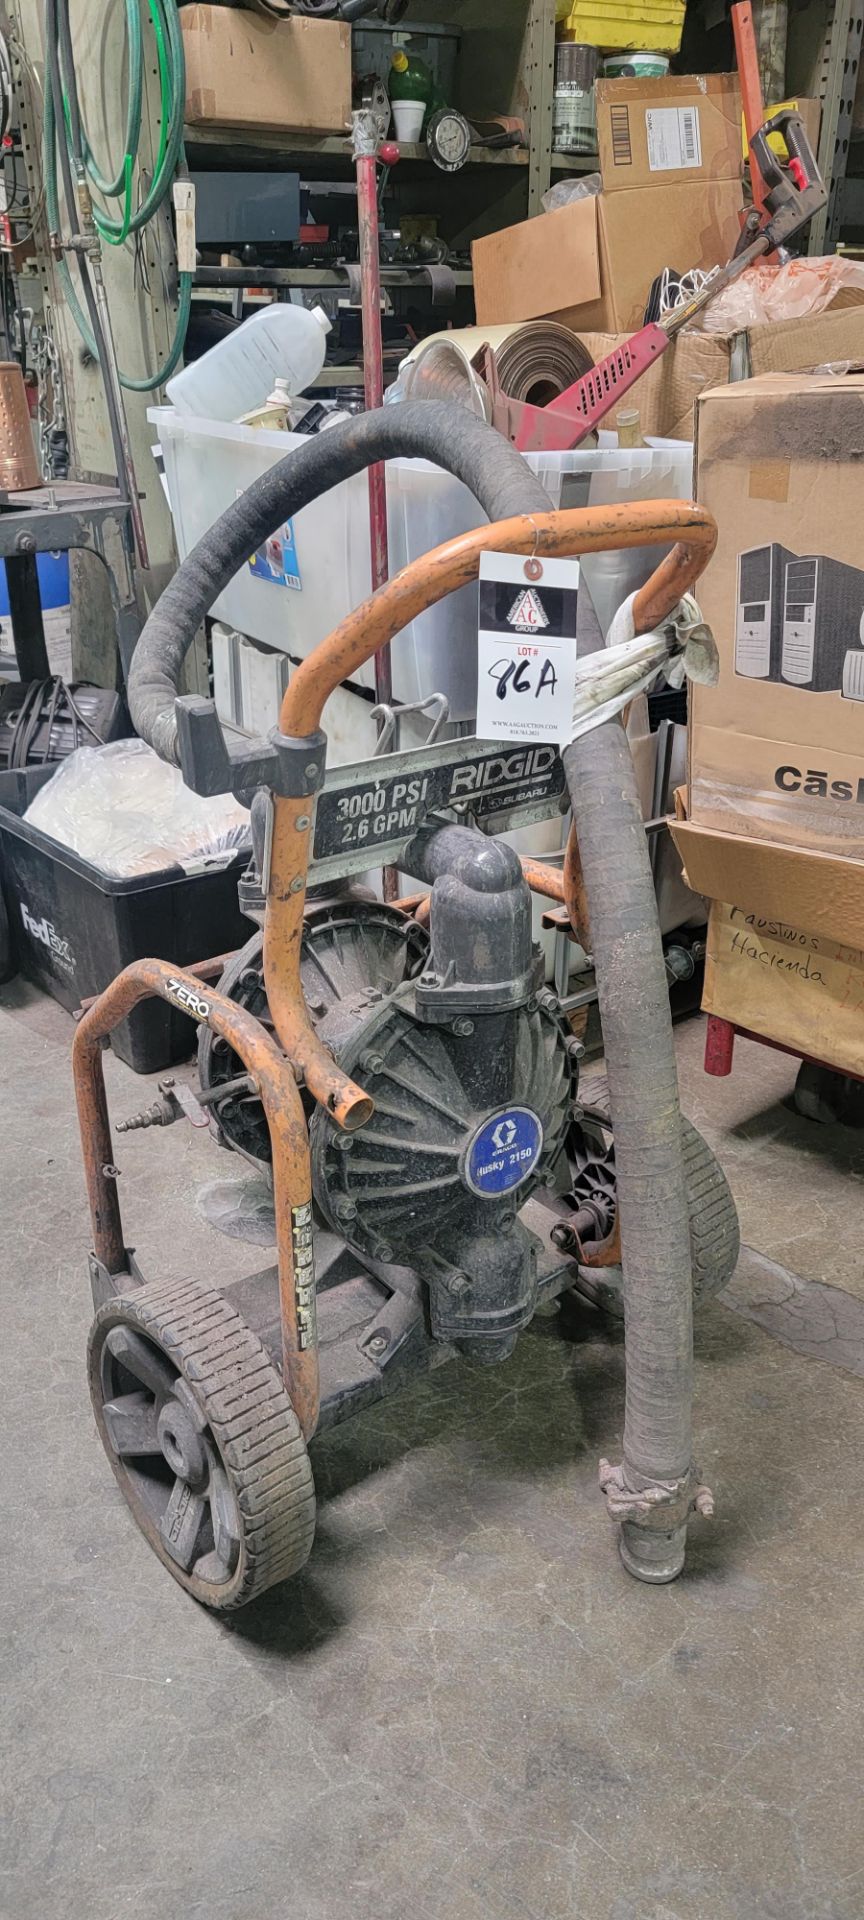 Craco Husky 2150 Pump with Cart (SOLD AS-IS - NO WARRANTY)